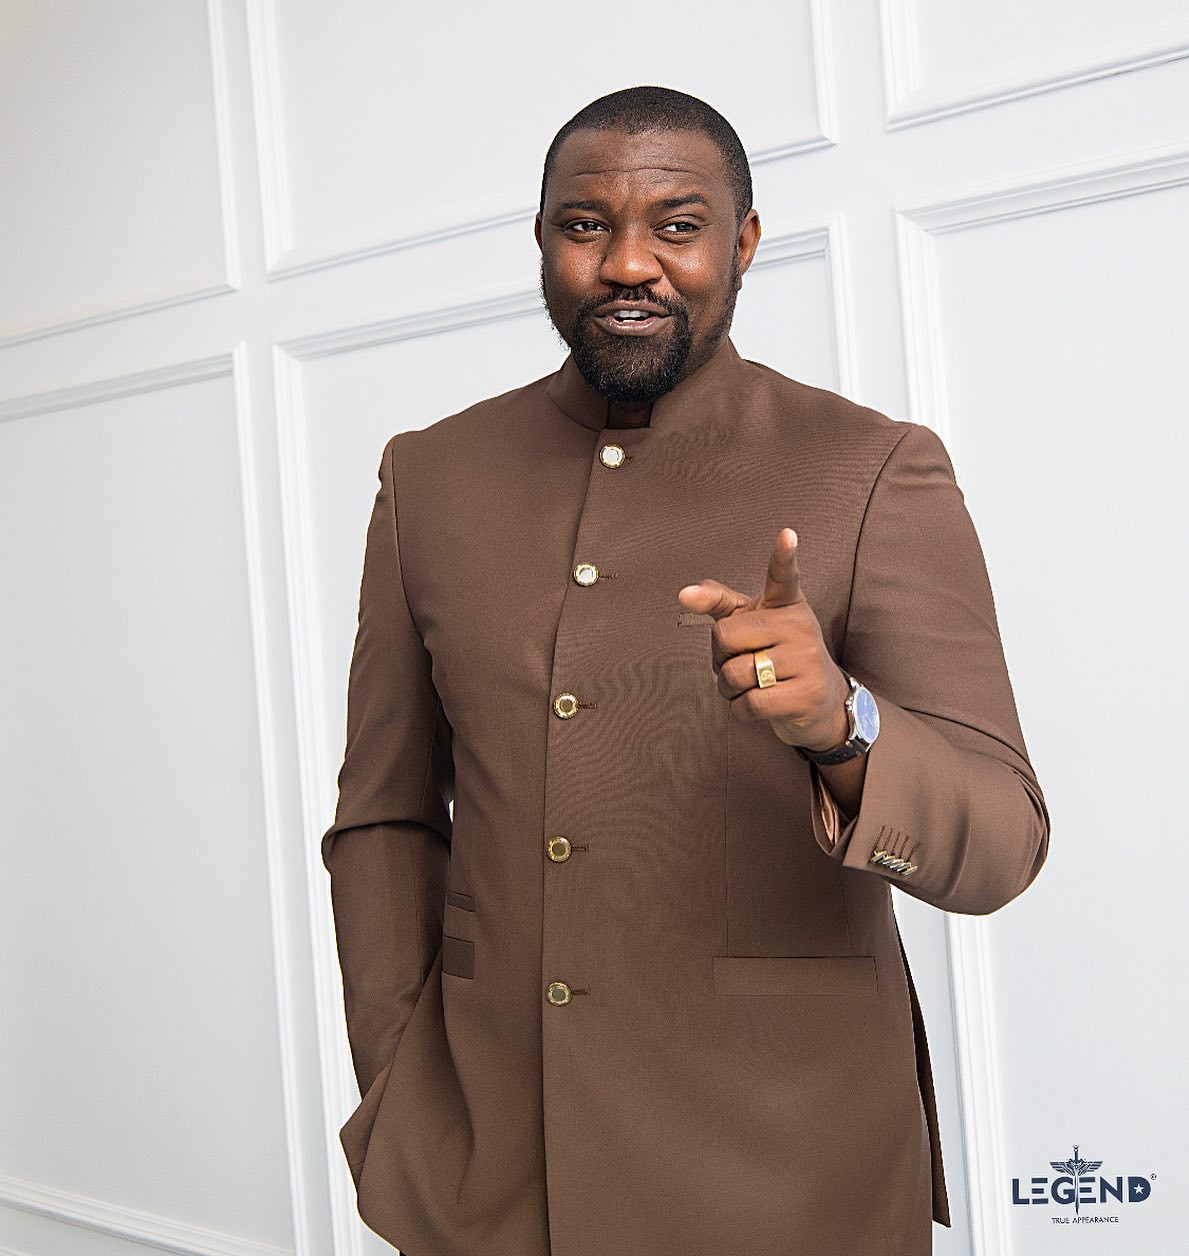 Rise up against the e-levy - John Dumelo charges Ghanaian celebrities